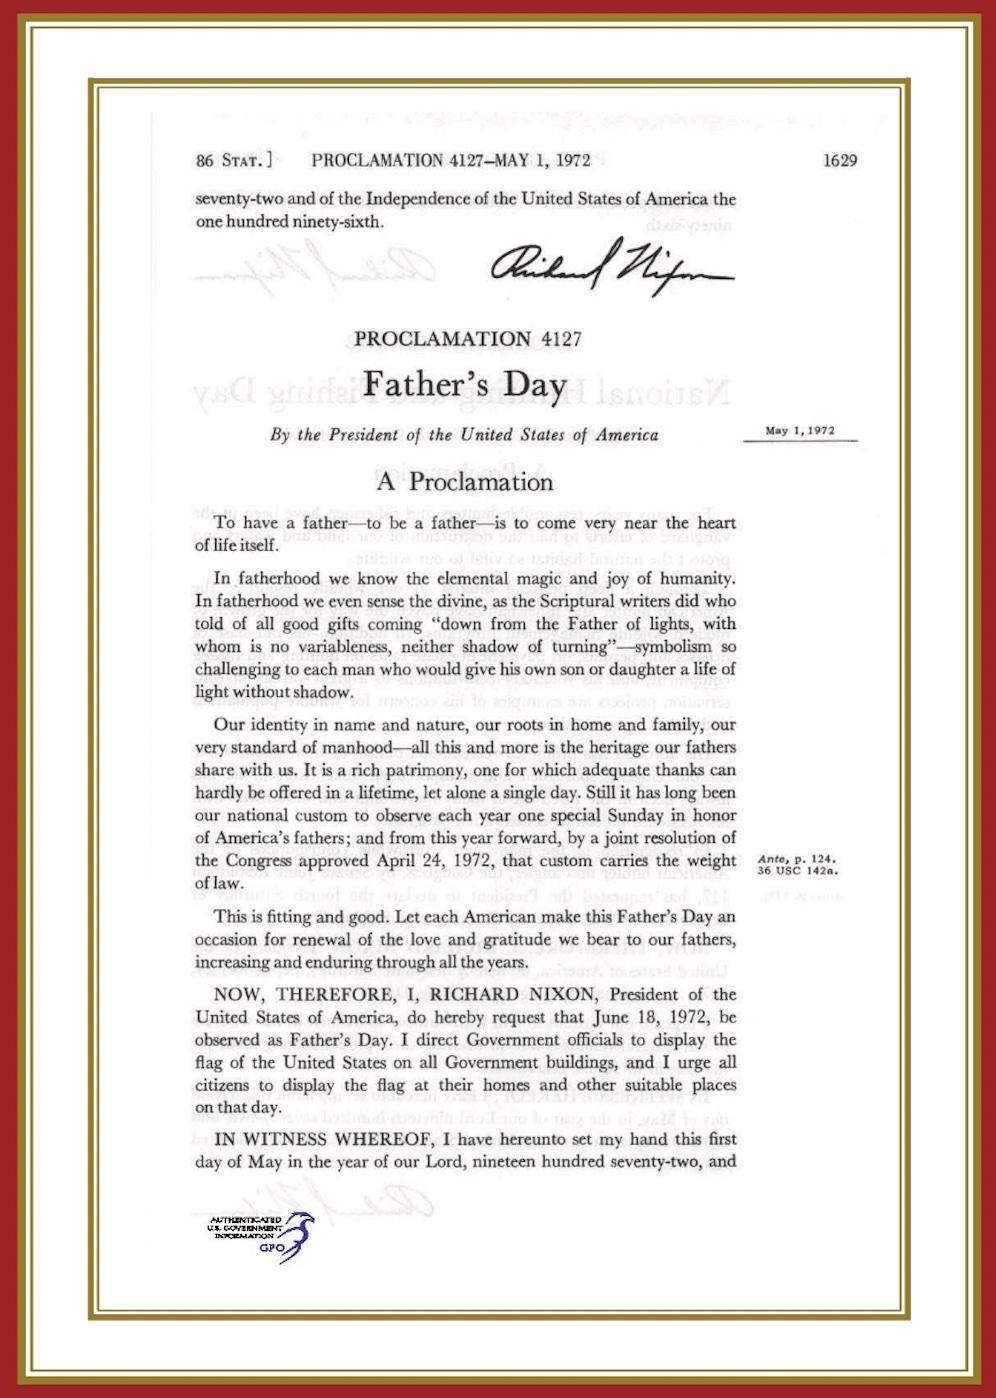 The proclamation signed by President Richard Nixon to formally recognize Father’s Day. (GPO)